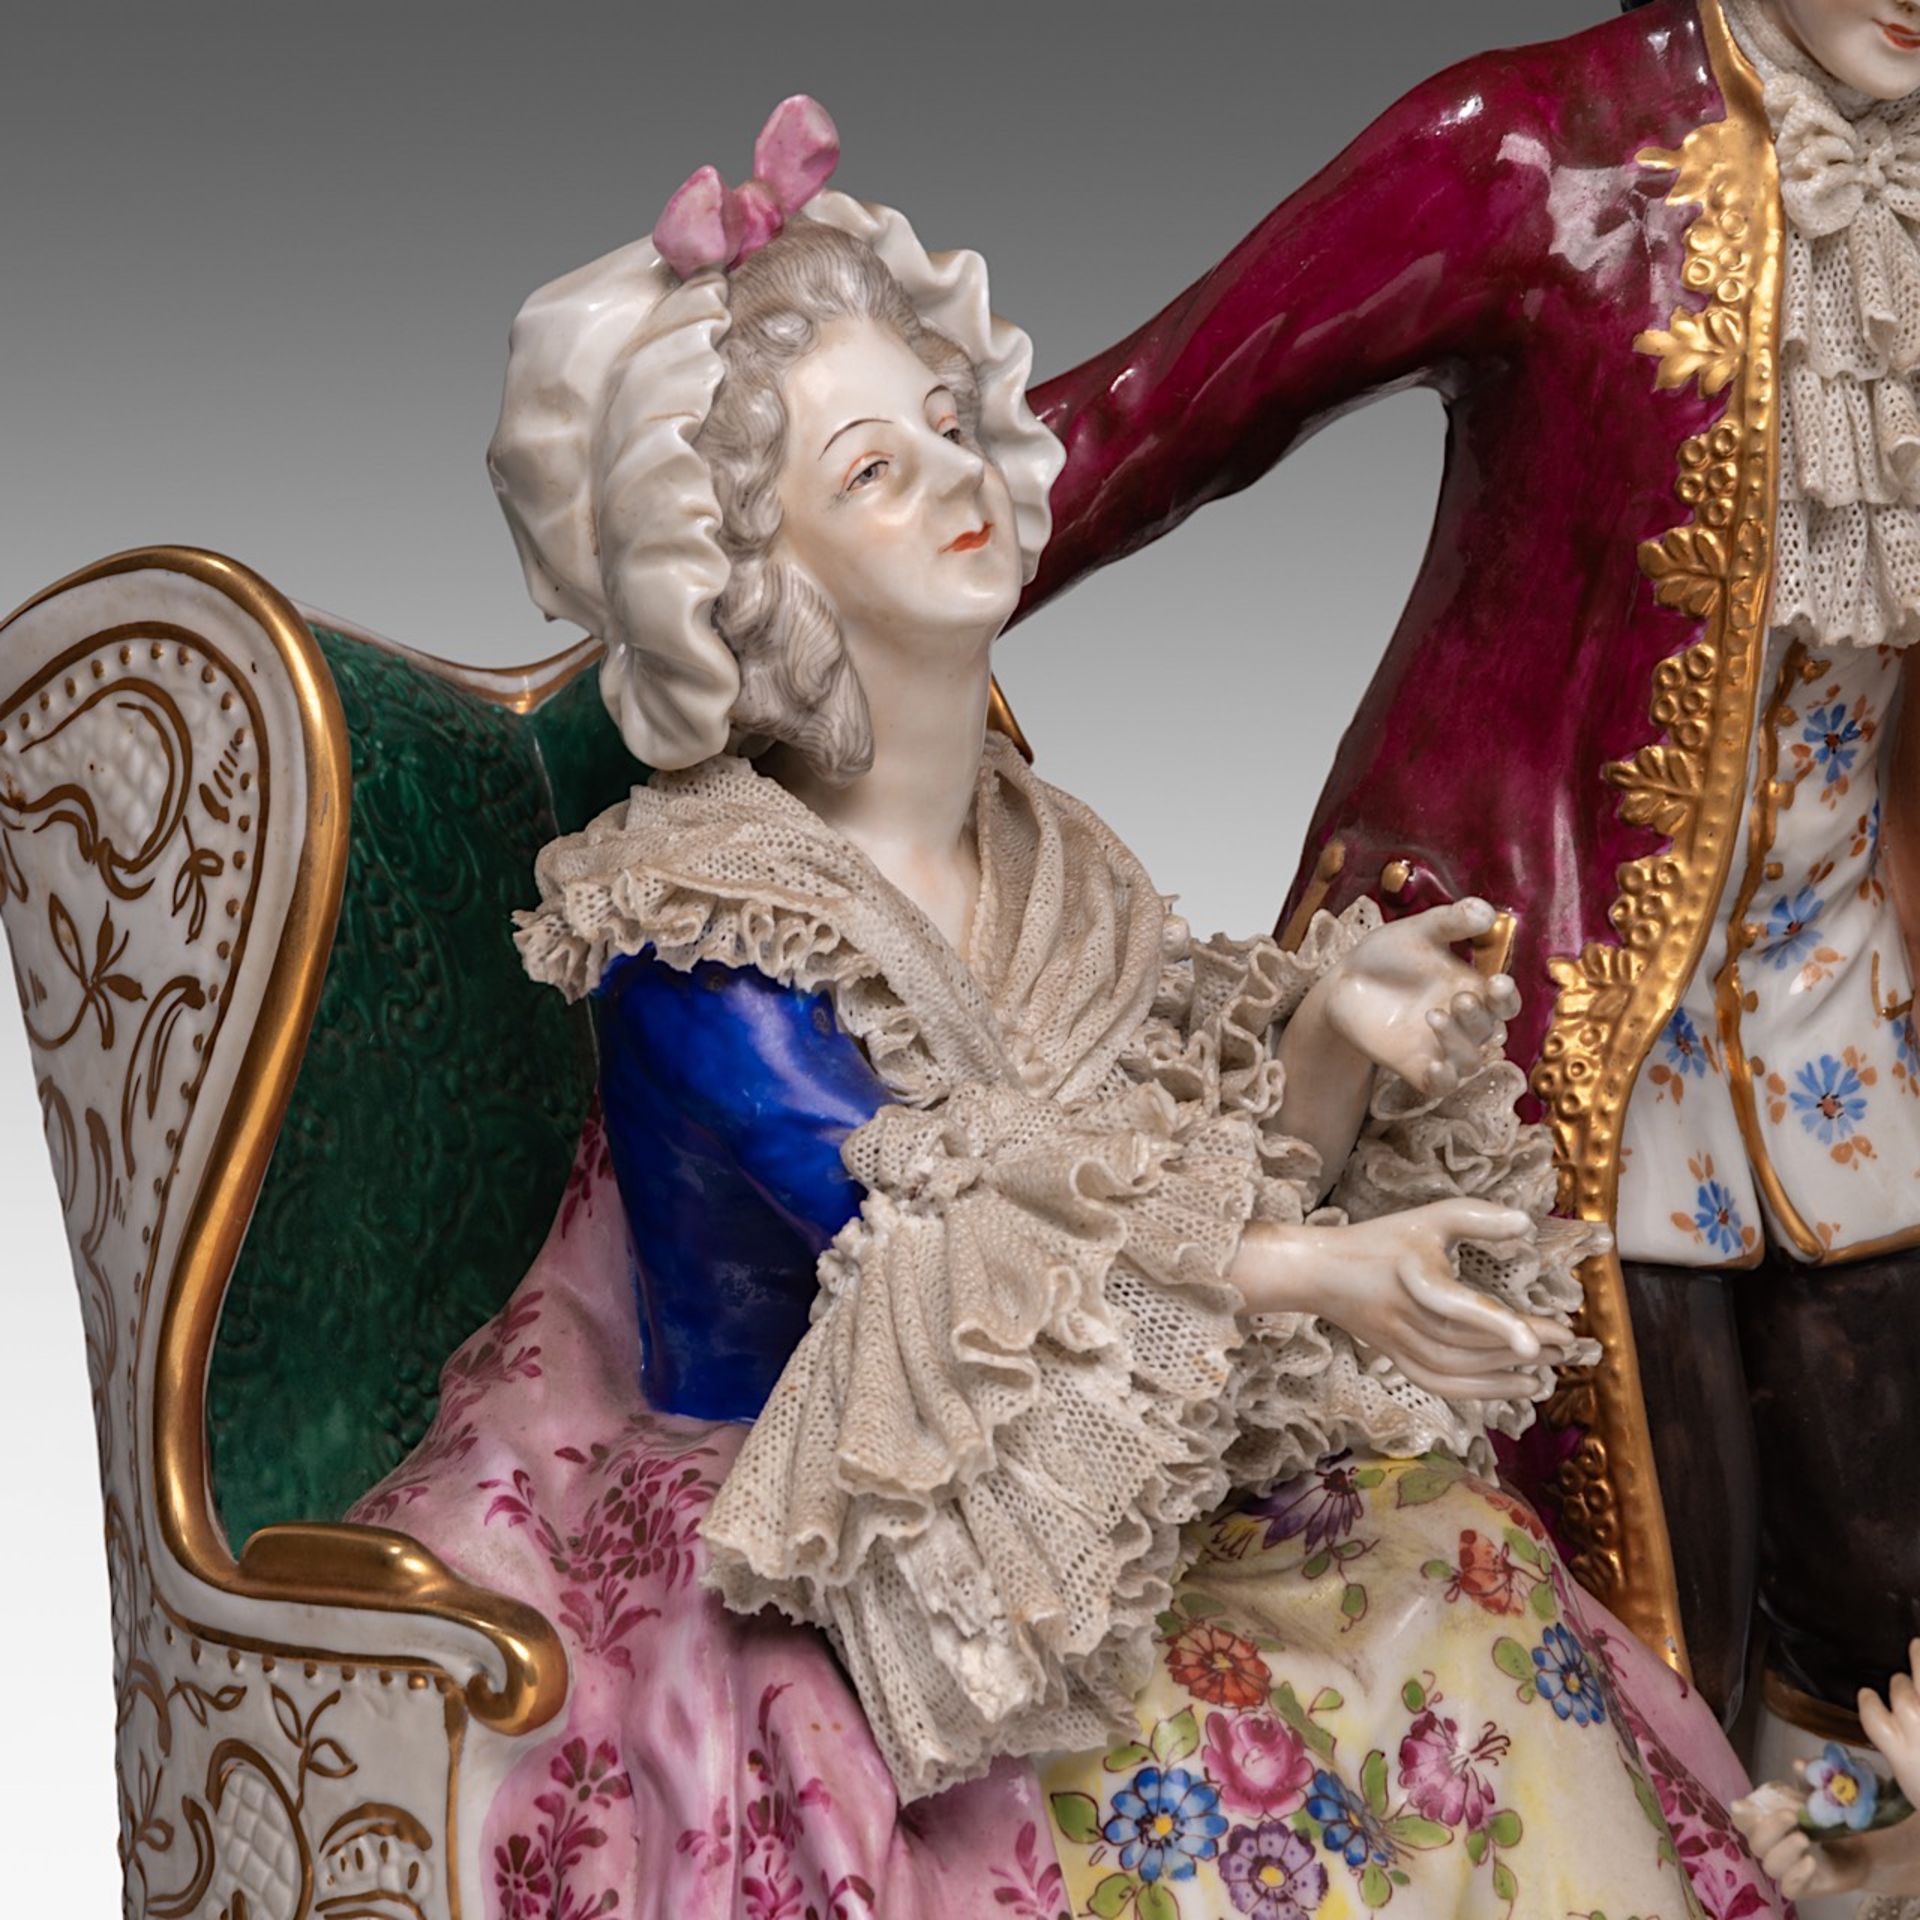 A large Saxony polychrome porcelain group depicting a gallant scene in a Rococo setting, H 40 - W 55 - Bild 8 aus 15